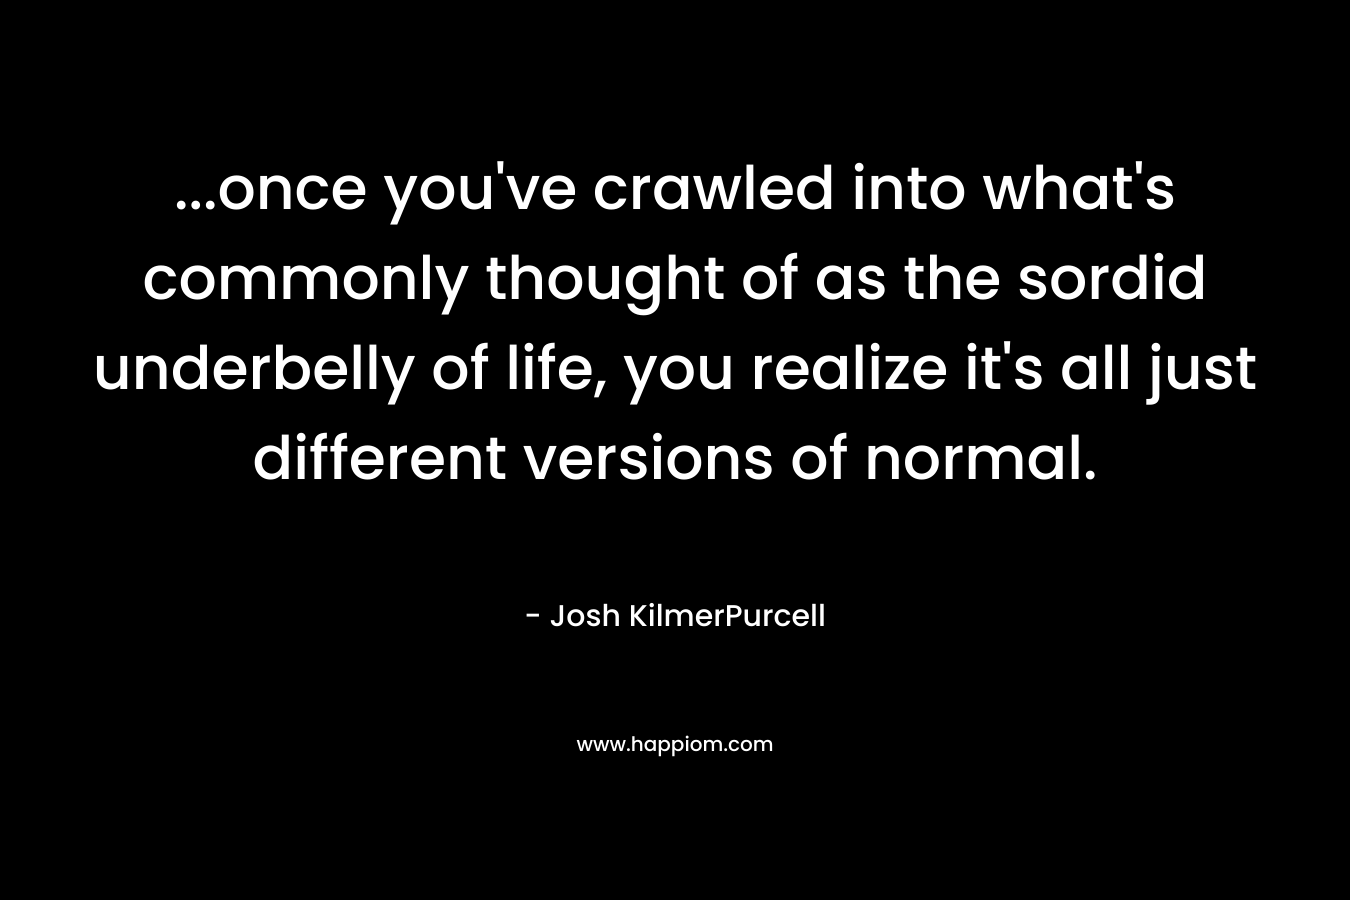 …once you’ve crawled into what’s commonly thought of as the sordid underbelly of life, you realize it’s all just different versions of normal. – Josh KilmerPurcell